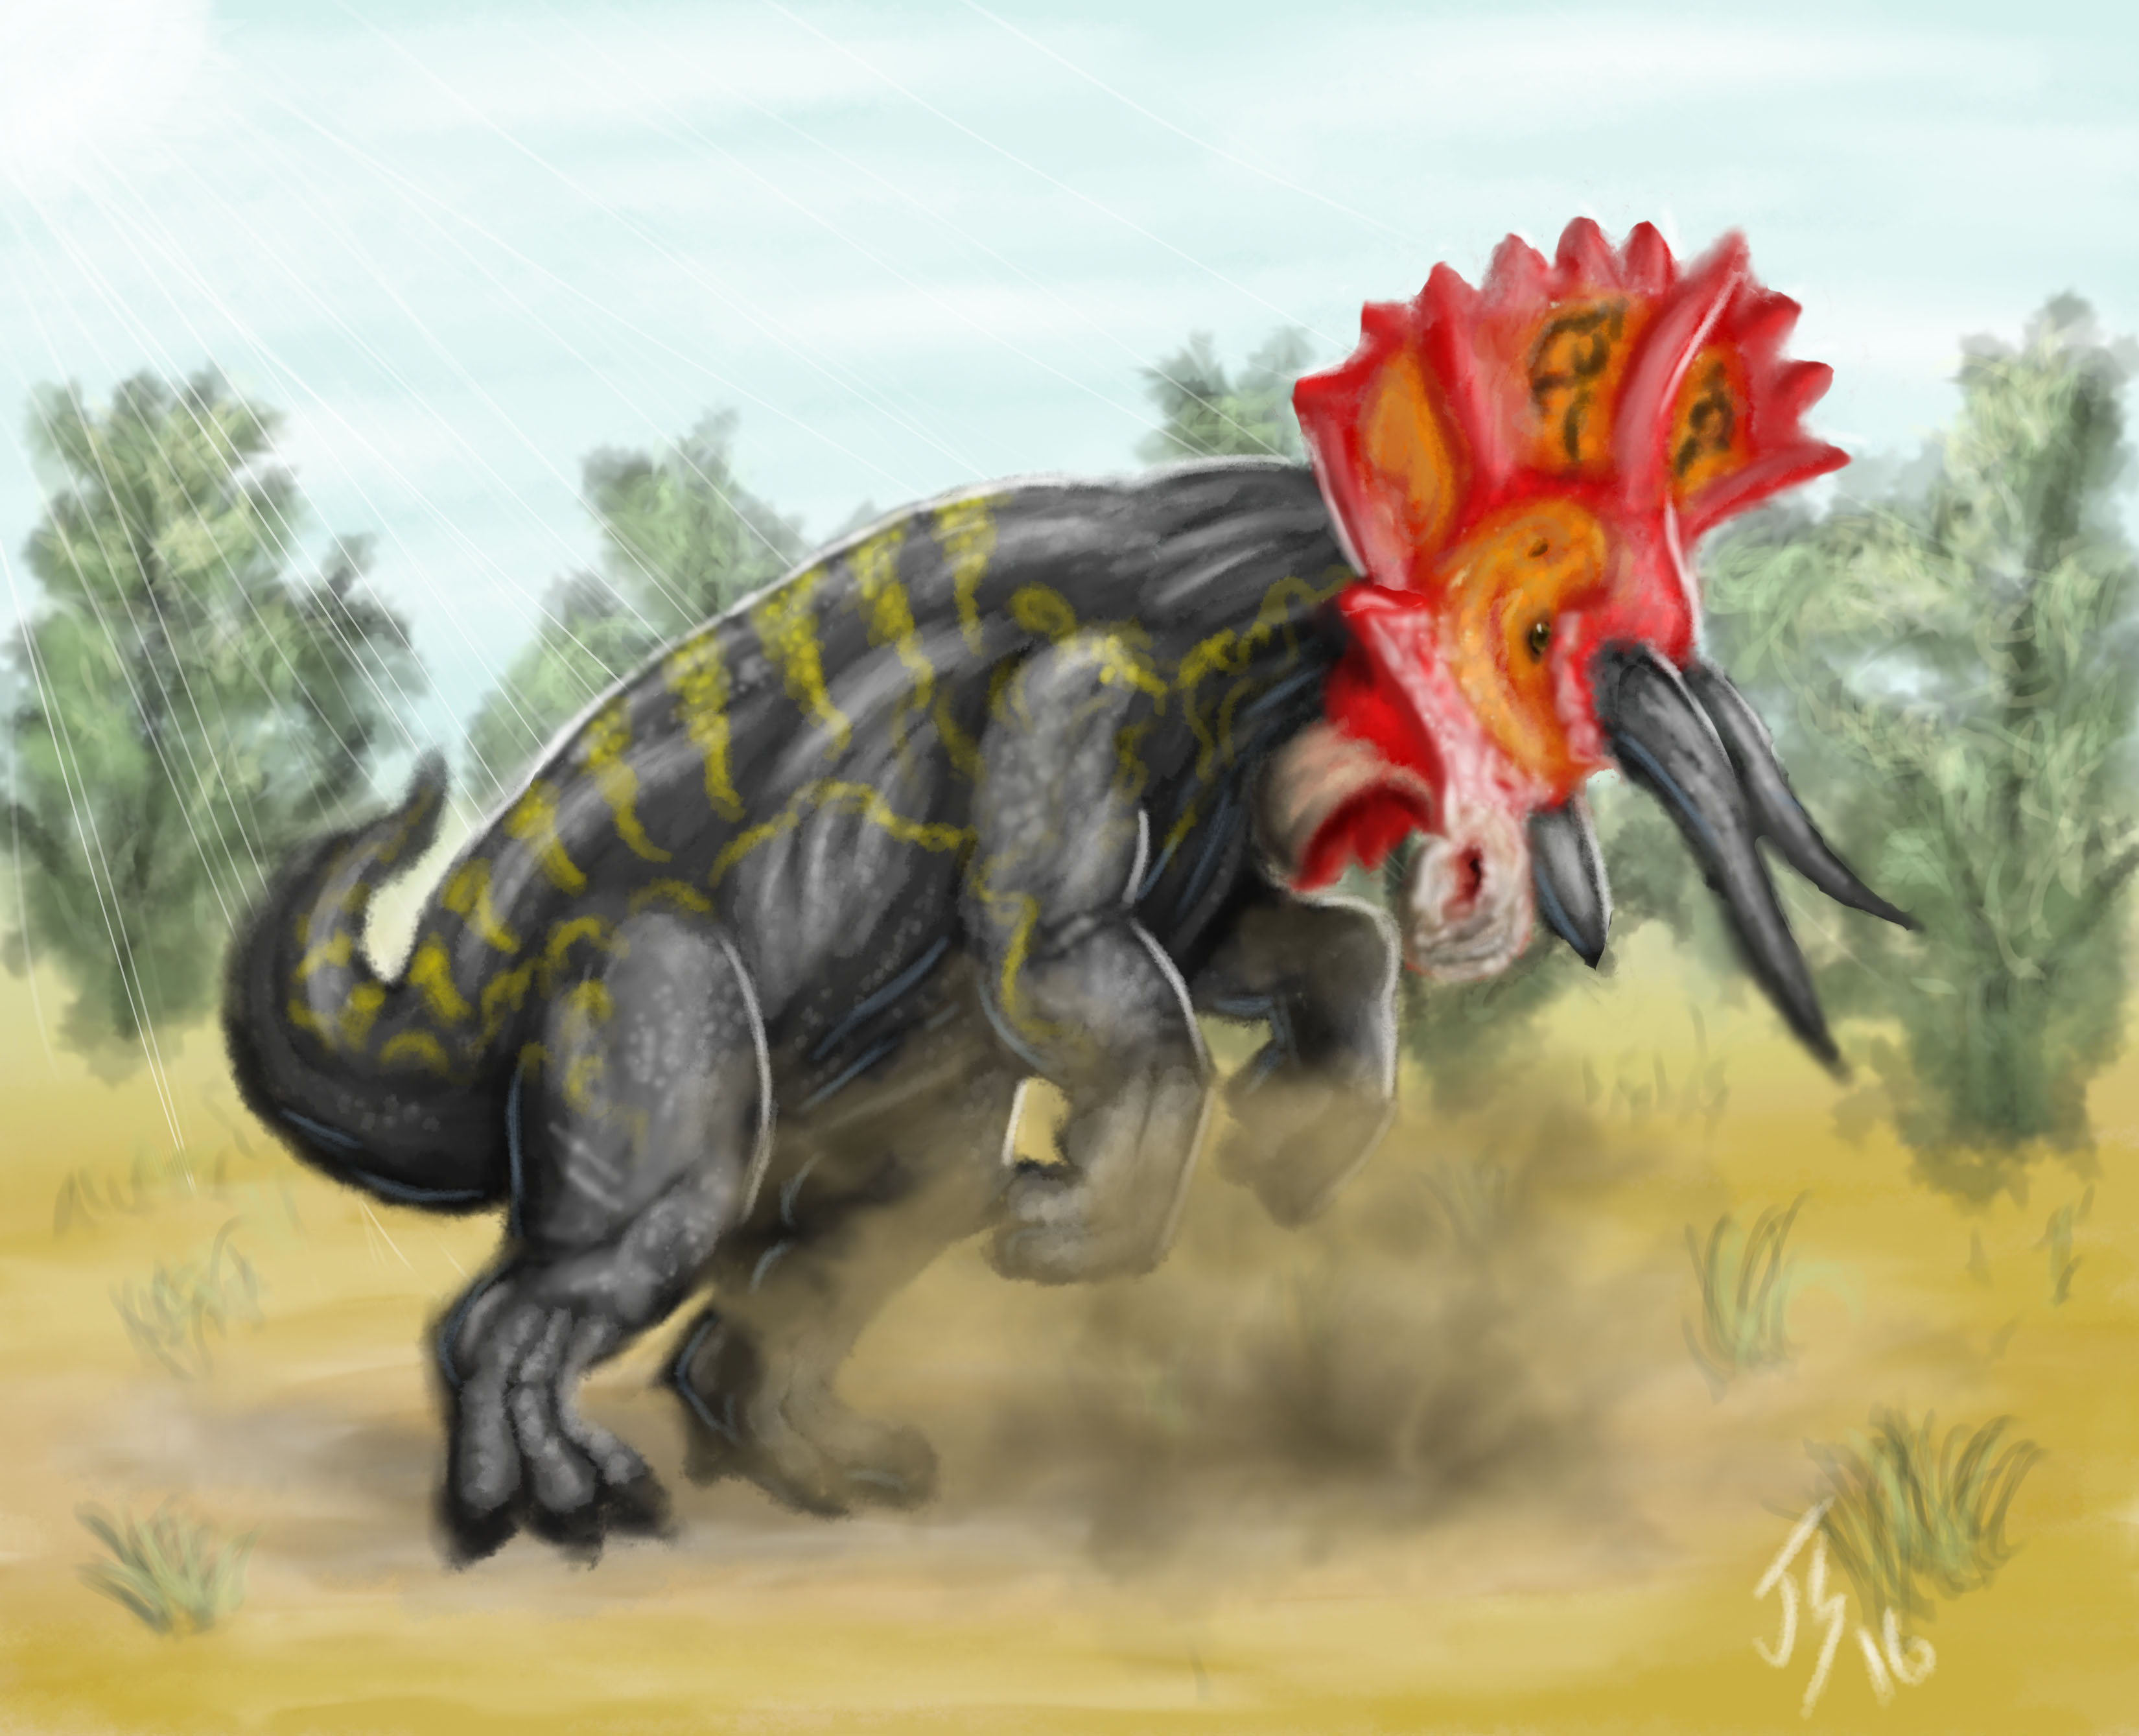 Triceratops in a challenging pose, possibly against a rival Triceratops or even a predator.